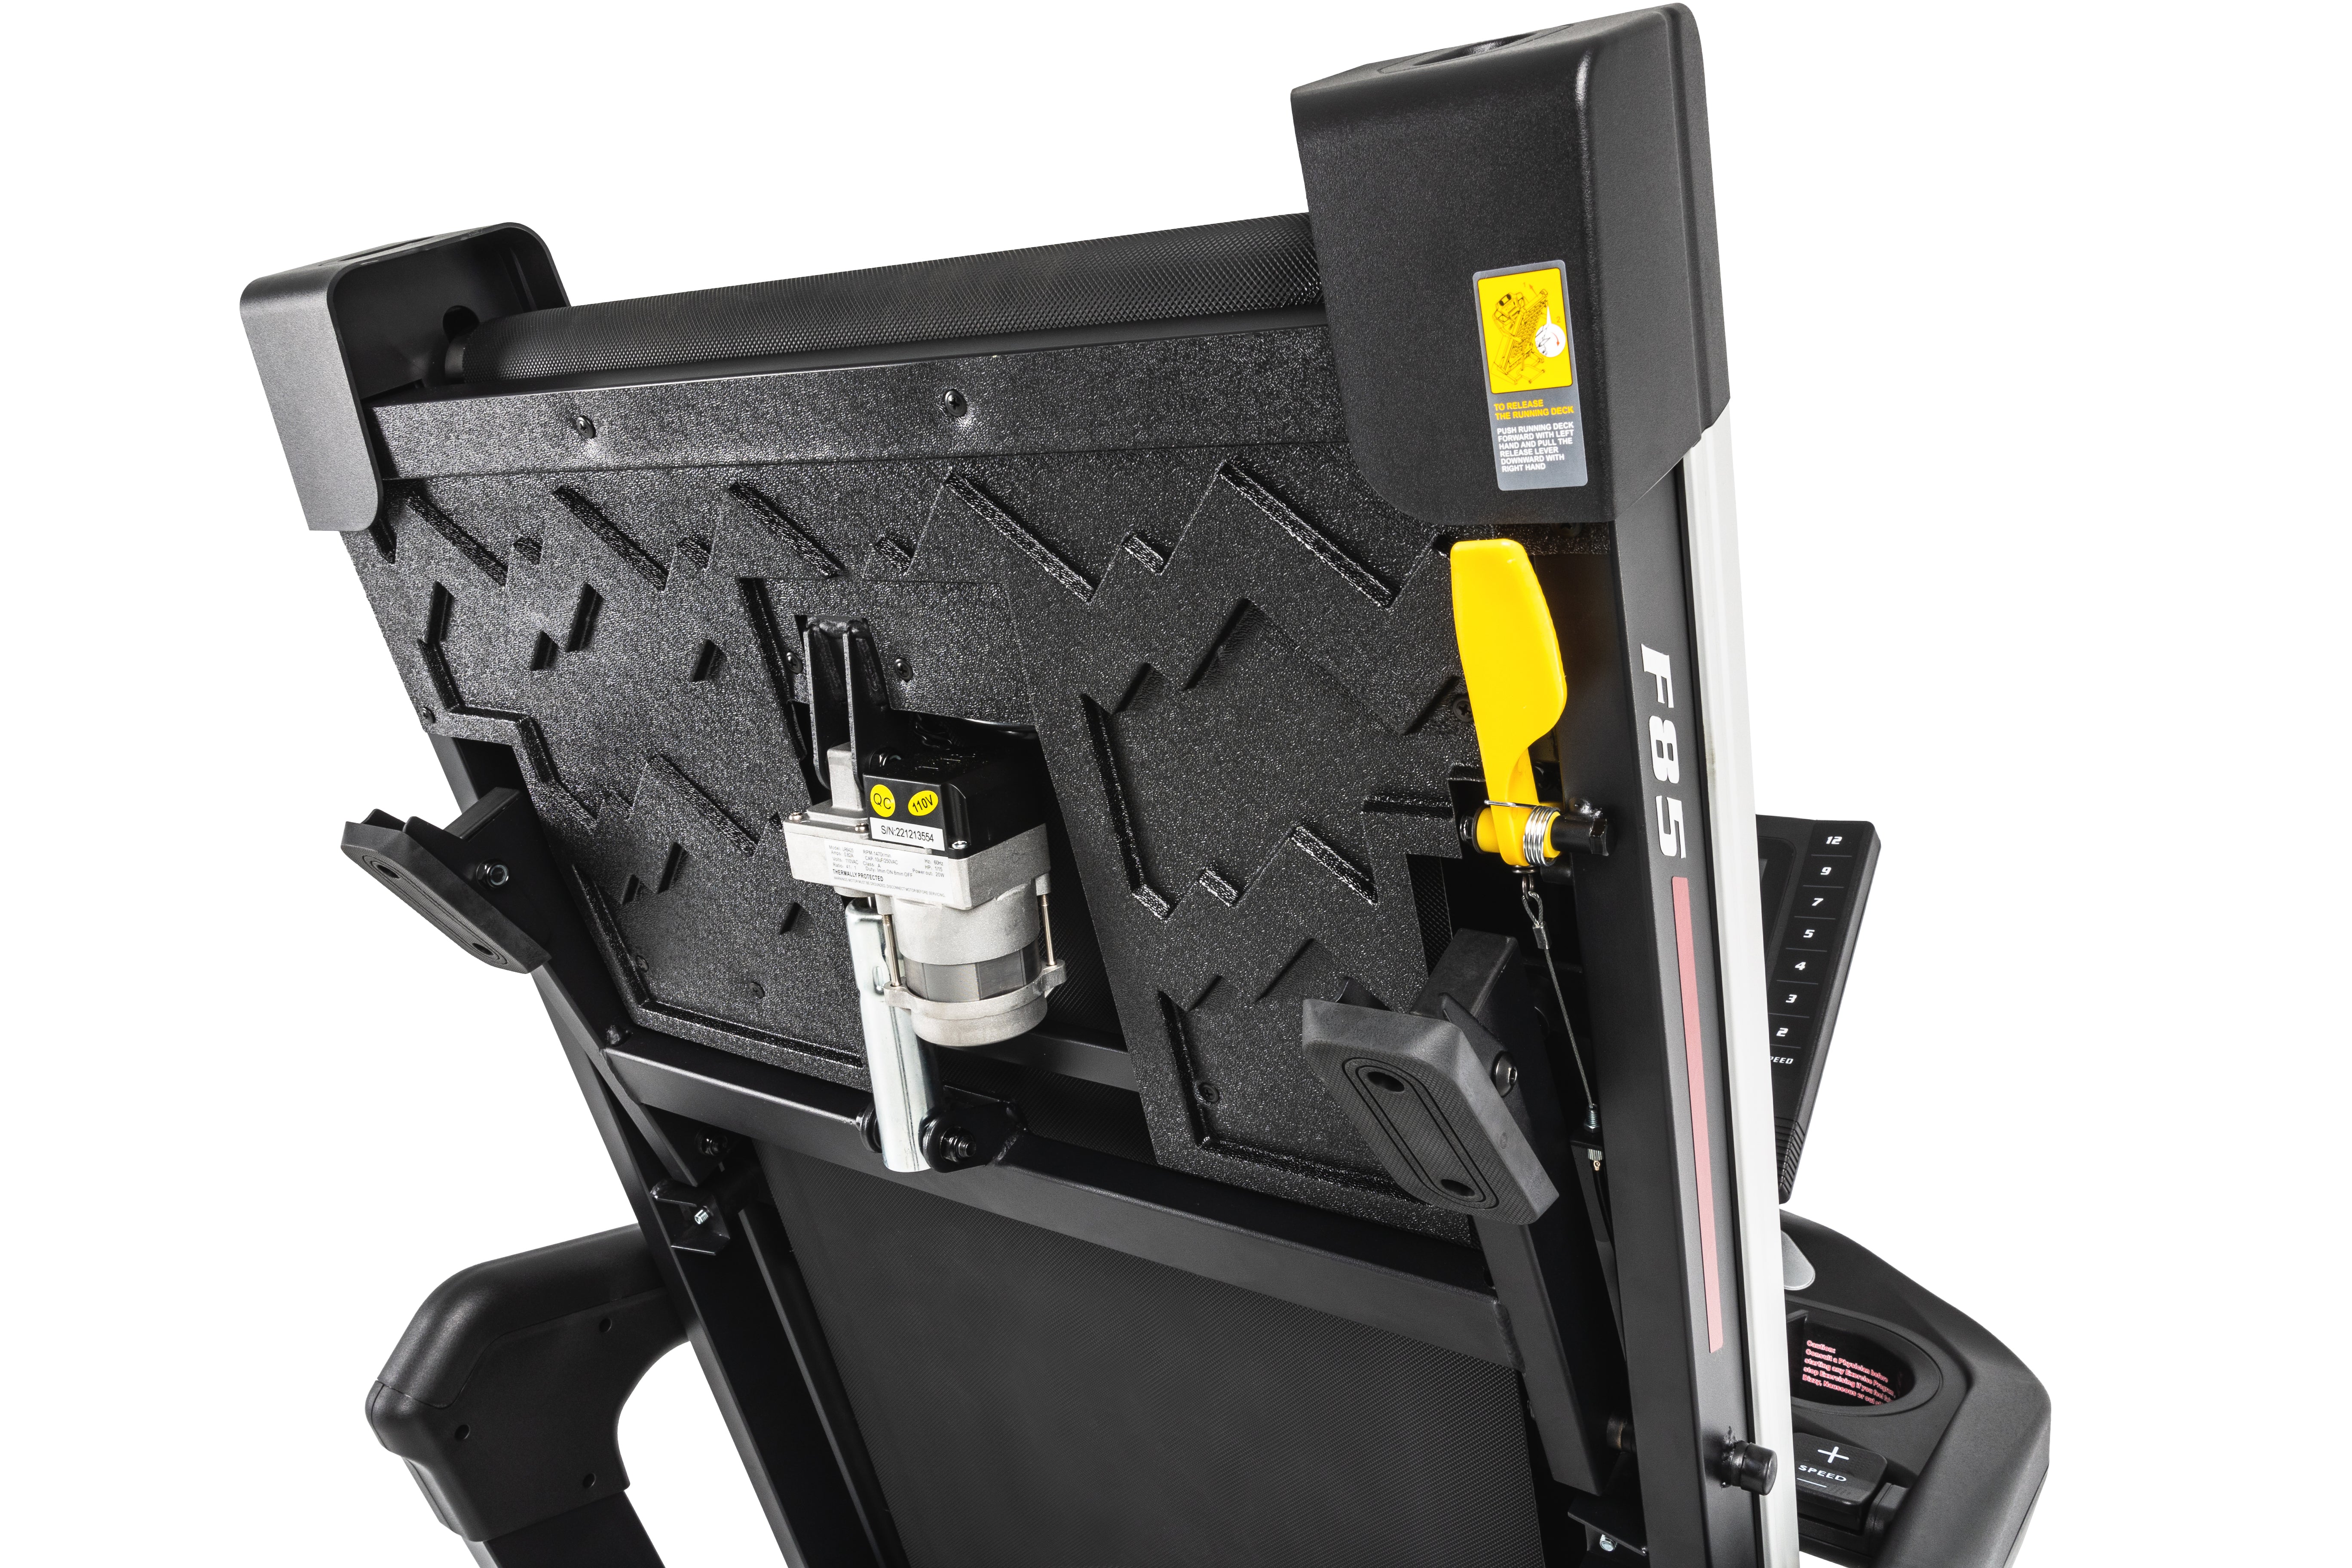 Close-up side view of the Sole F85 treadmill's mechanical components, showcasing a textured deck, a yellow folding release lever, a warning label, and a section of the F85 branding on the treadmill's frame, with a glimpse of the control panel in the background.